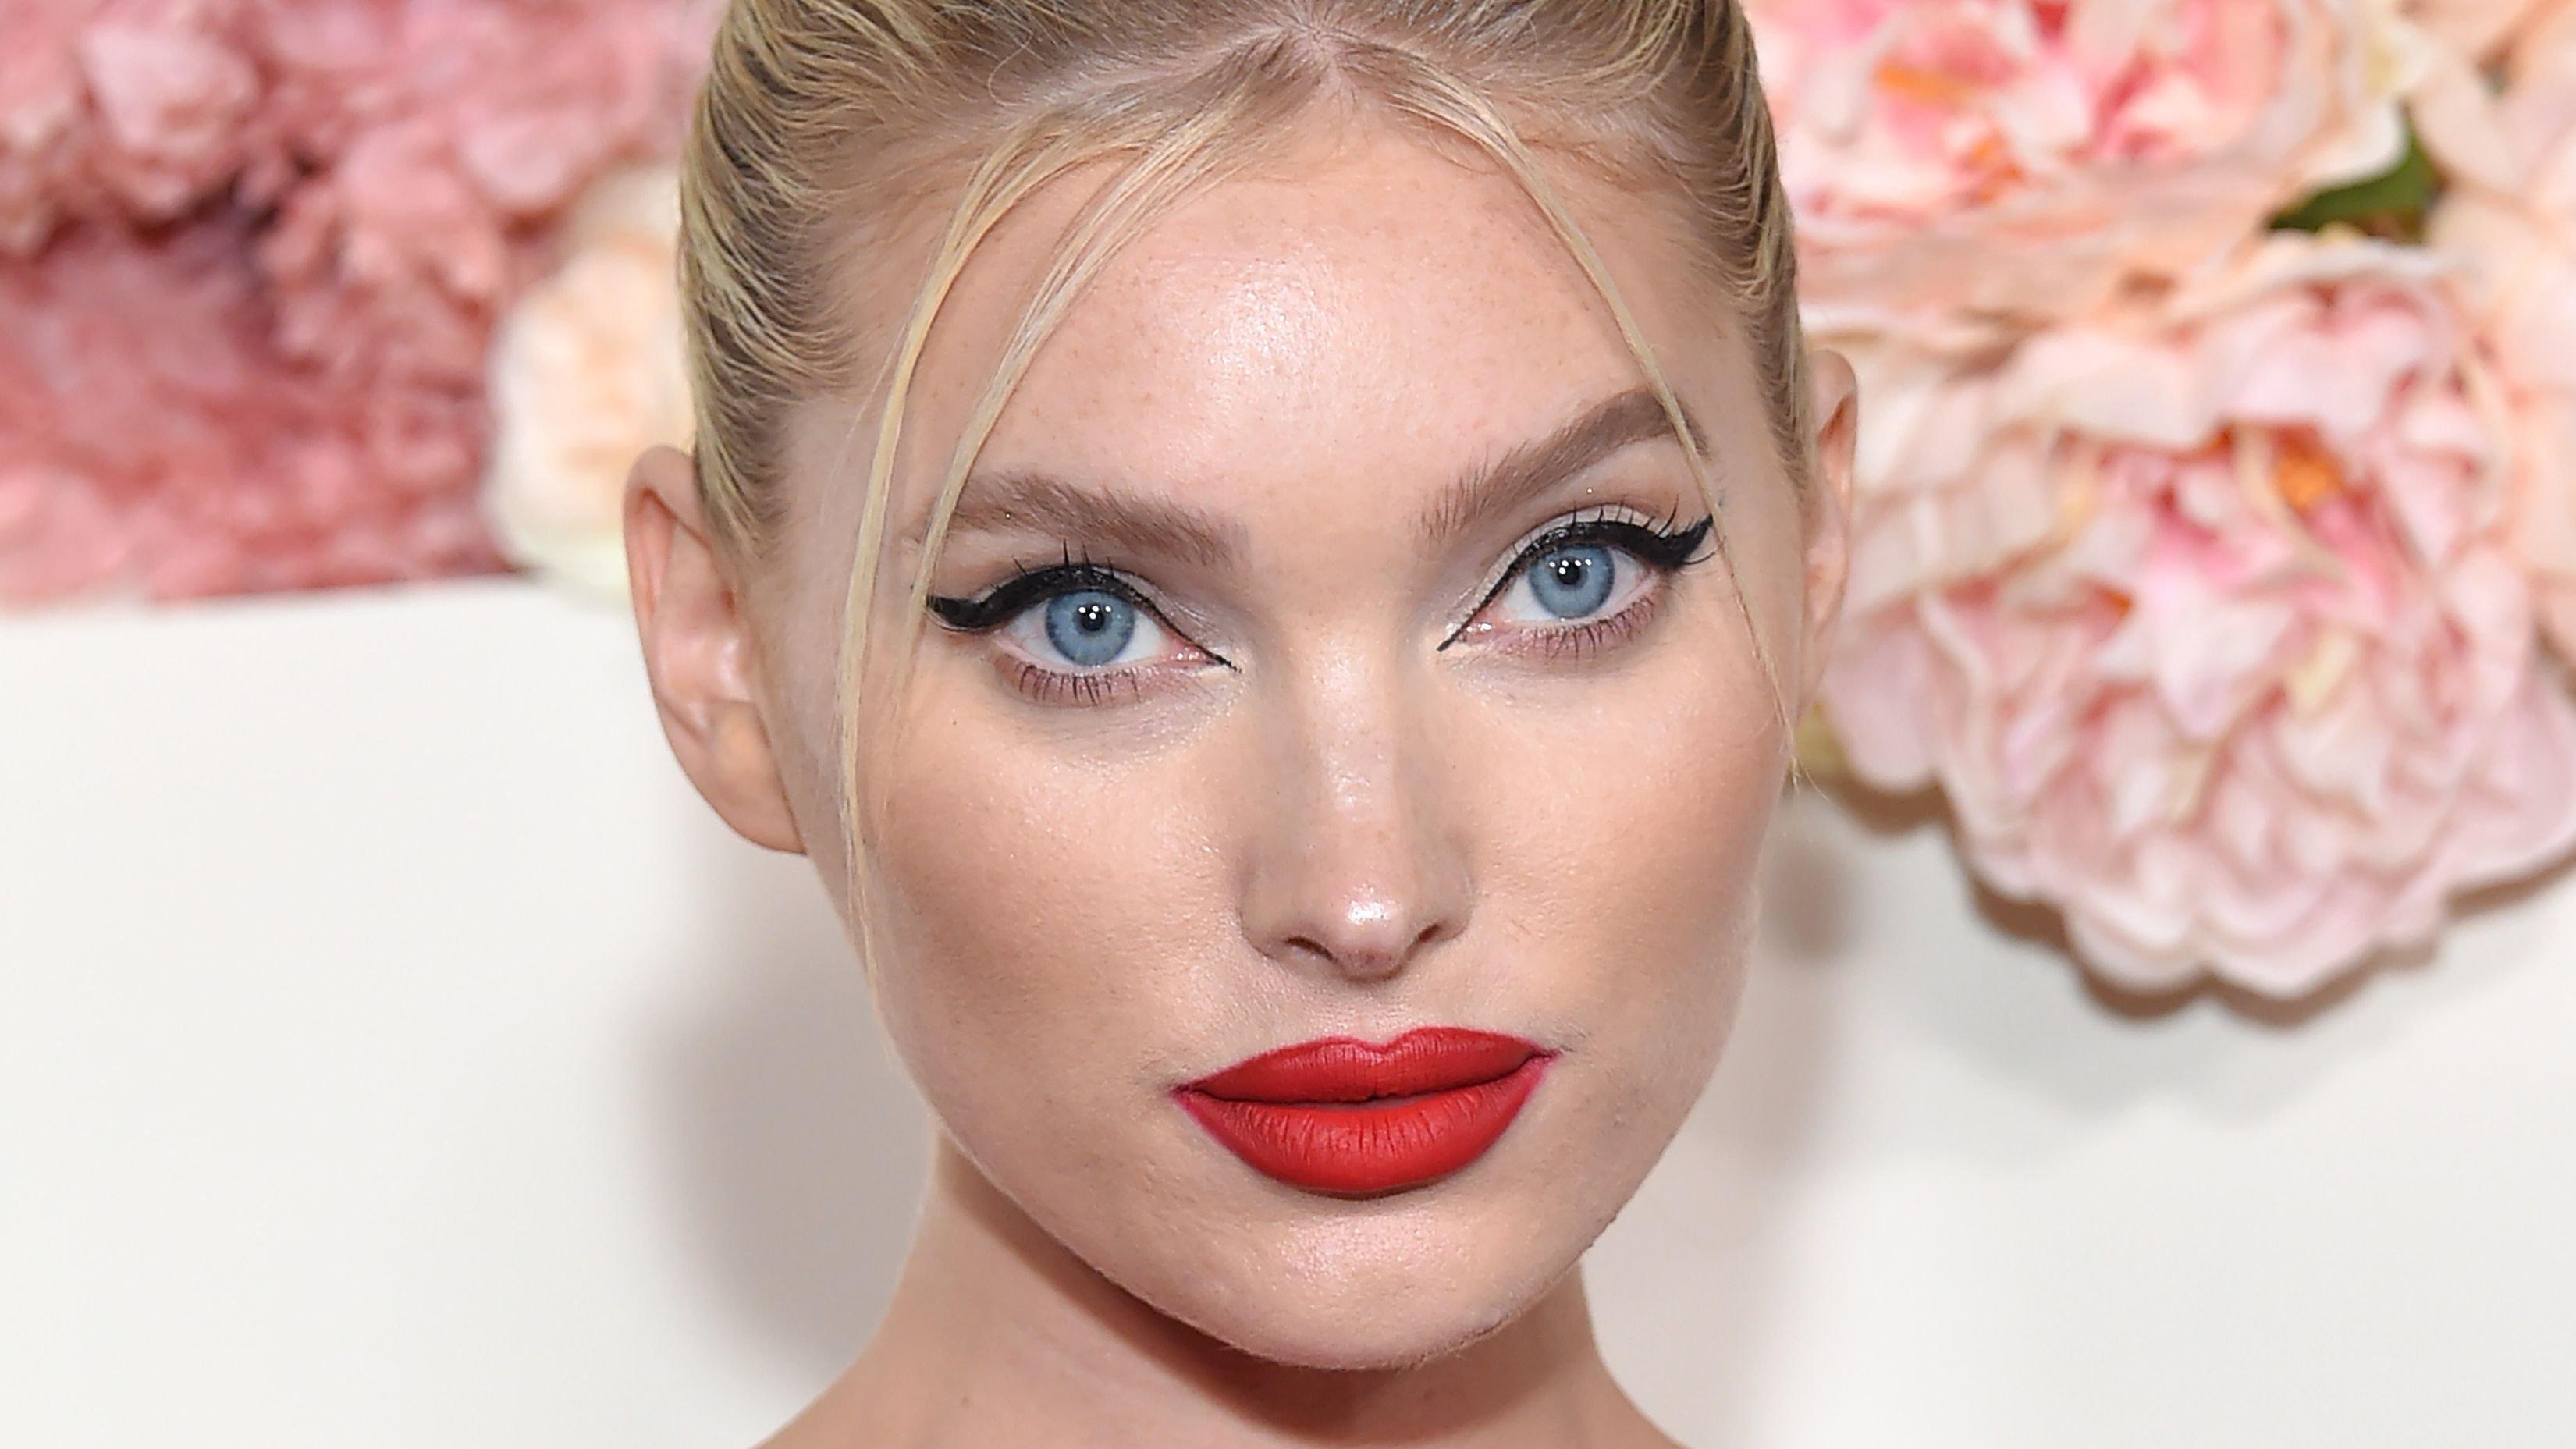 Elsa Hosk rocks bold red lip and pulled-back hair at an event.